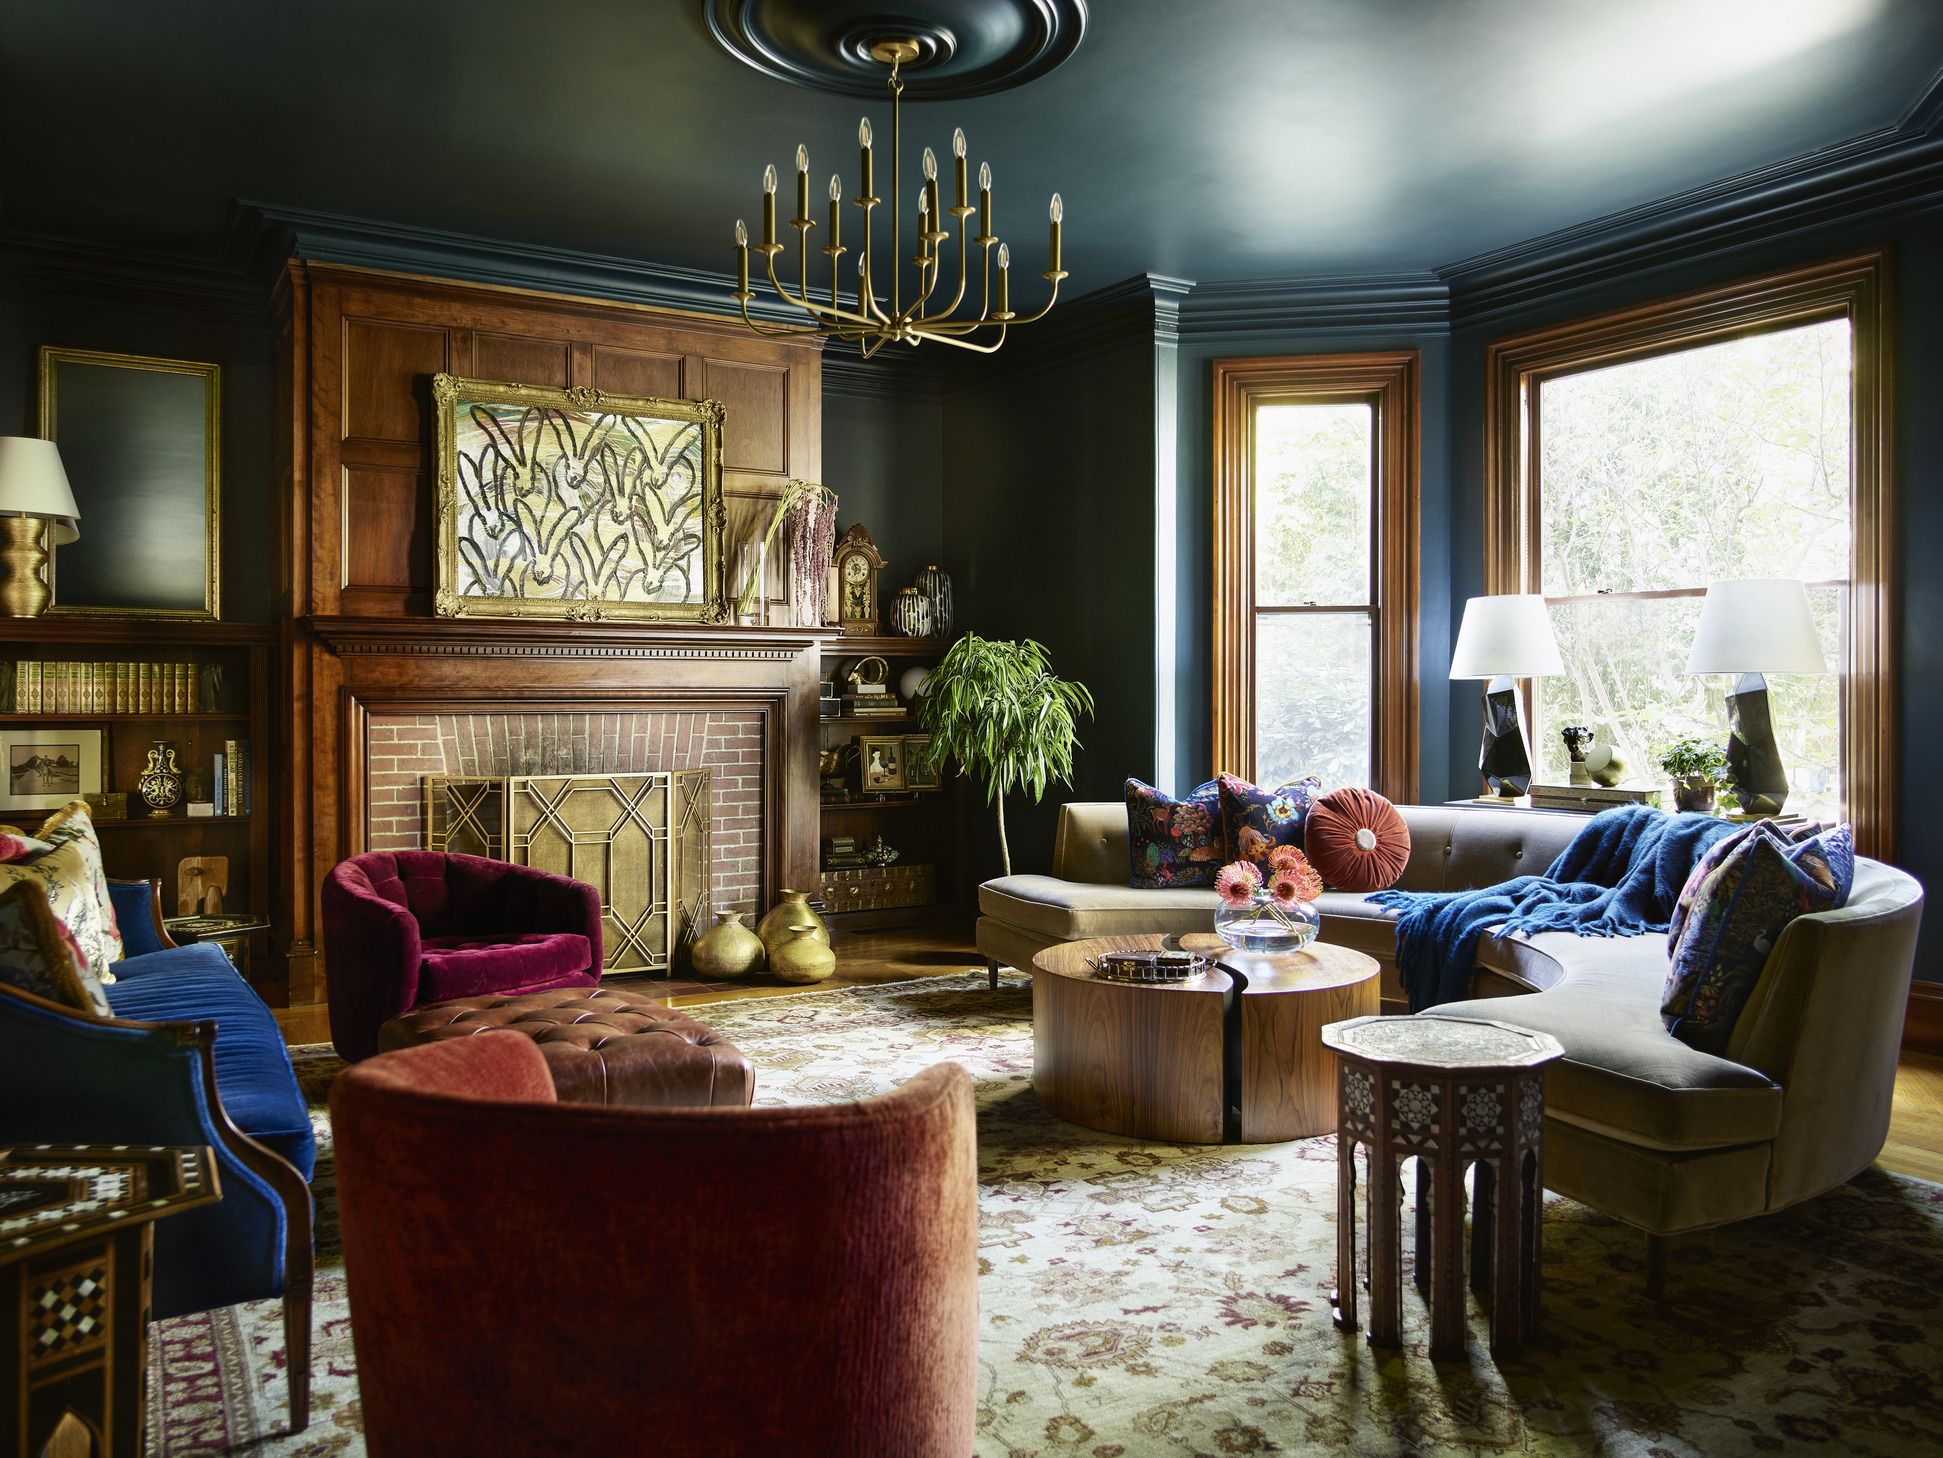 The 9 Best Green Paint Colors Designers Turn to Again and Again